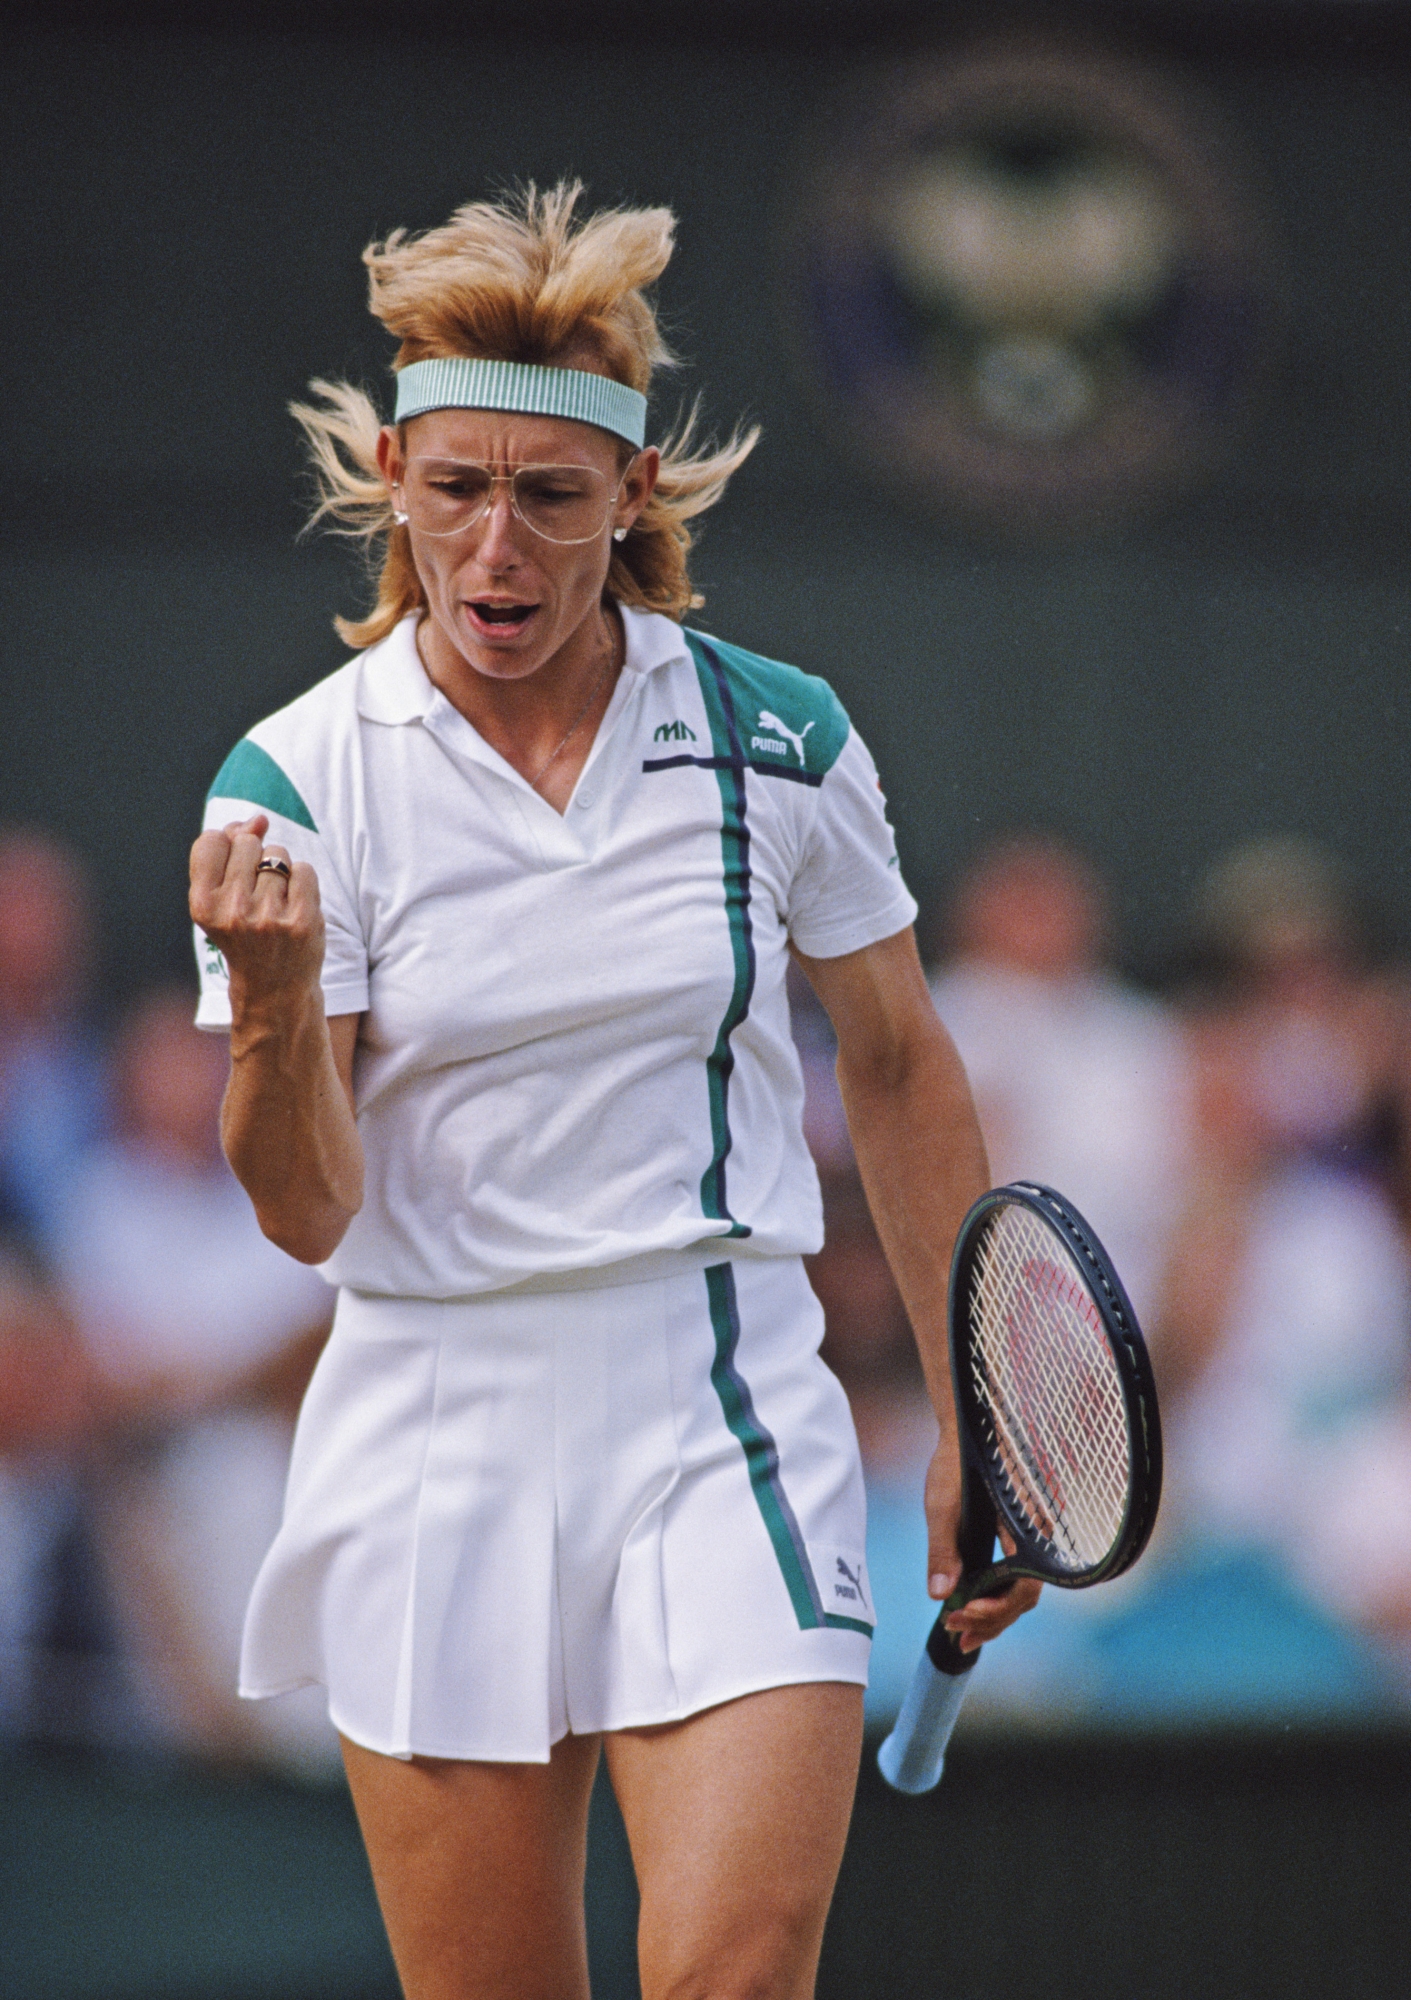 Martina Navratilova of the United States pumps her fist during her Women's Singles Final match against Steffi Graf at the Wimbledon Lawn Tennis Championship on 3 July 1988 at the All England Lawn Tennis and Croquet Club in Wimbledon in London, England. (Photo by Bob Martin/Getty Images)